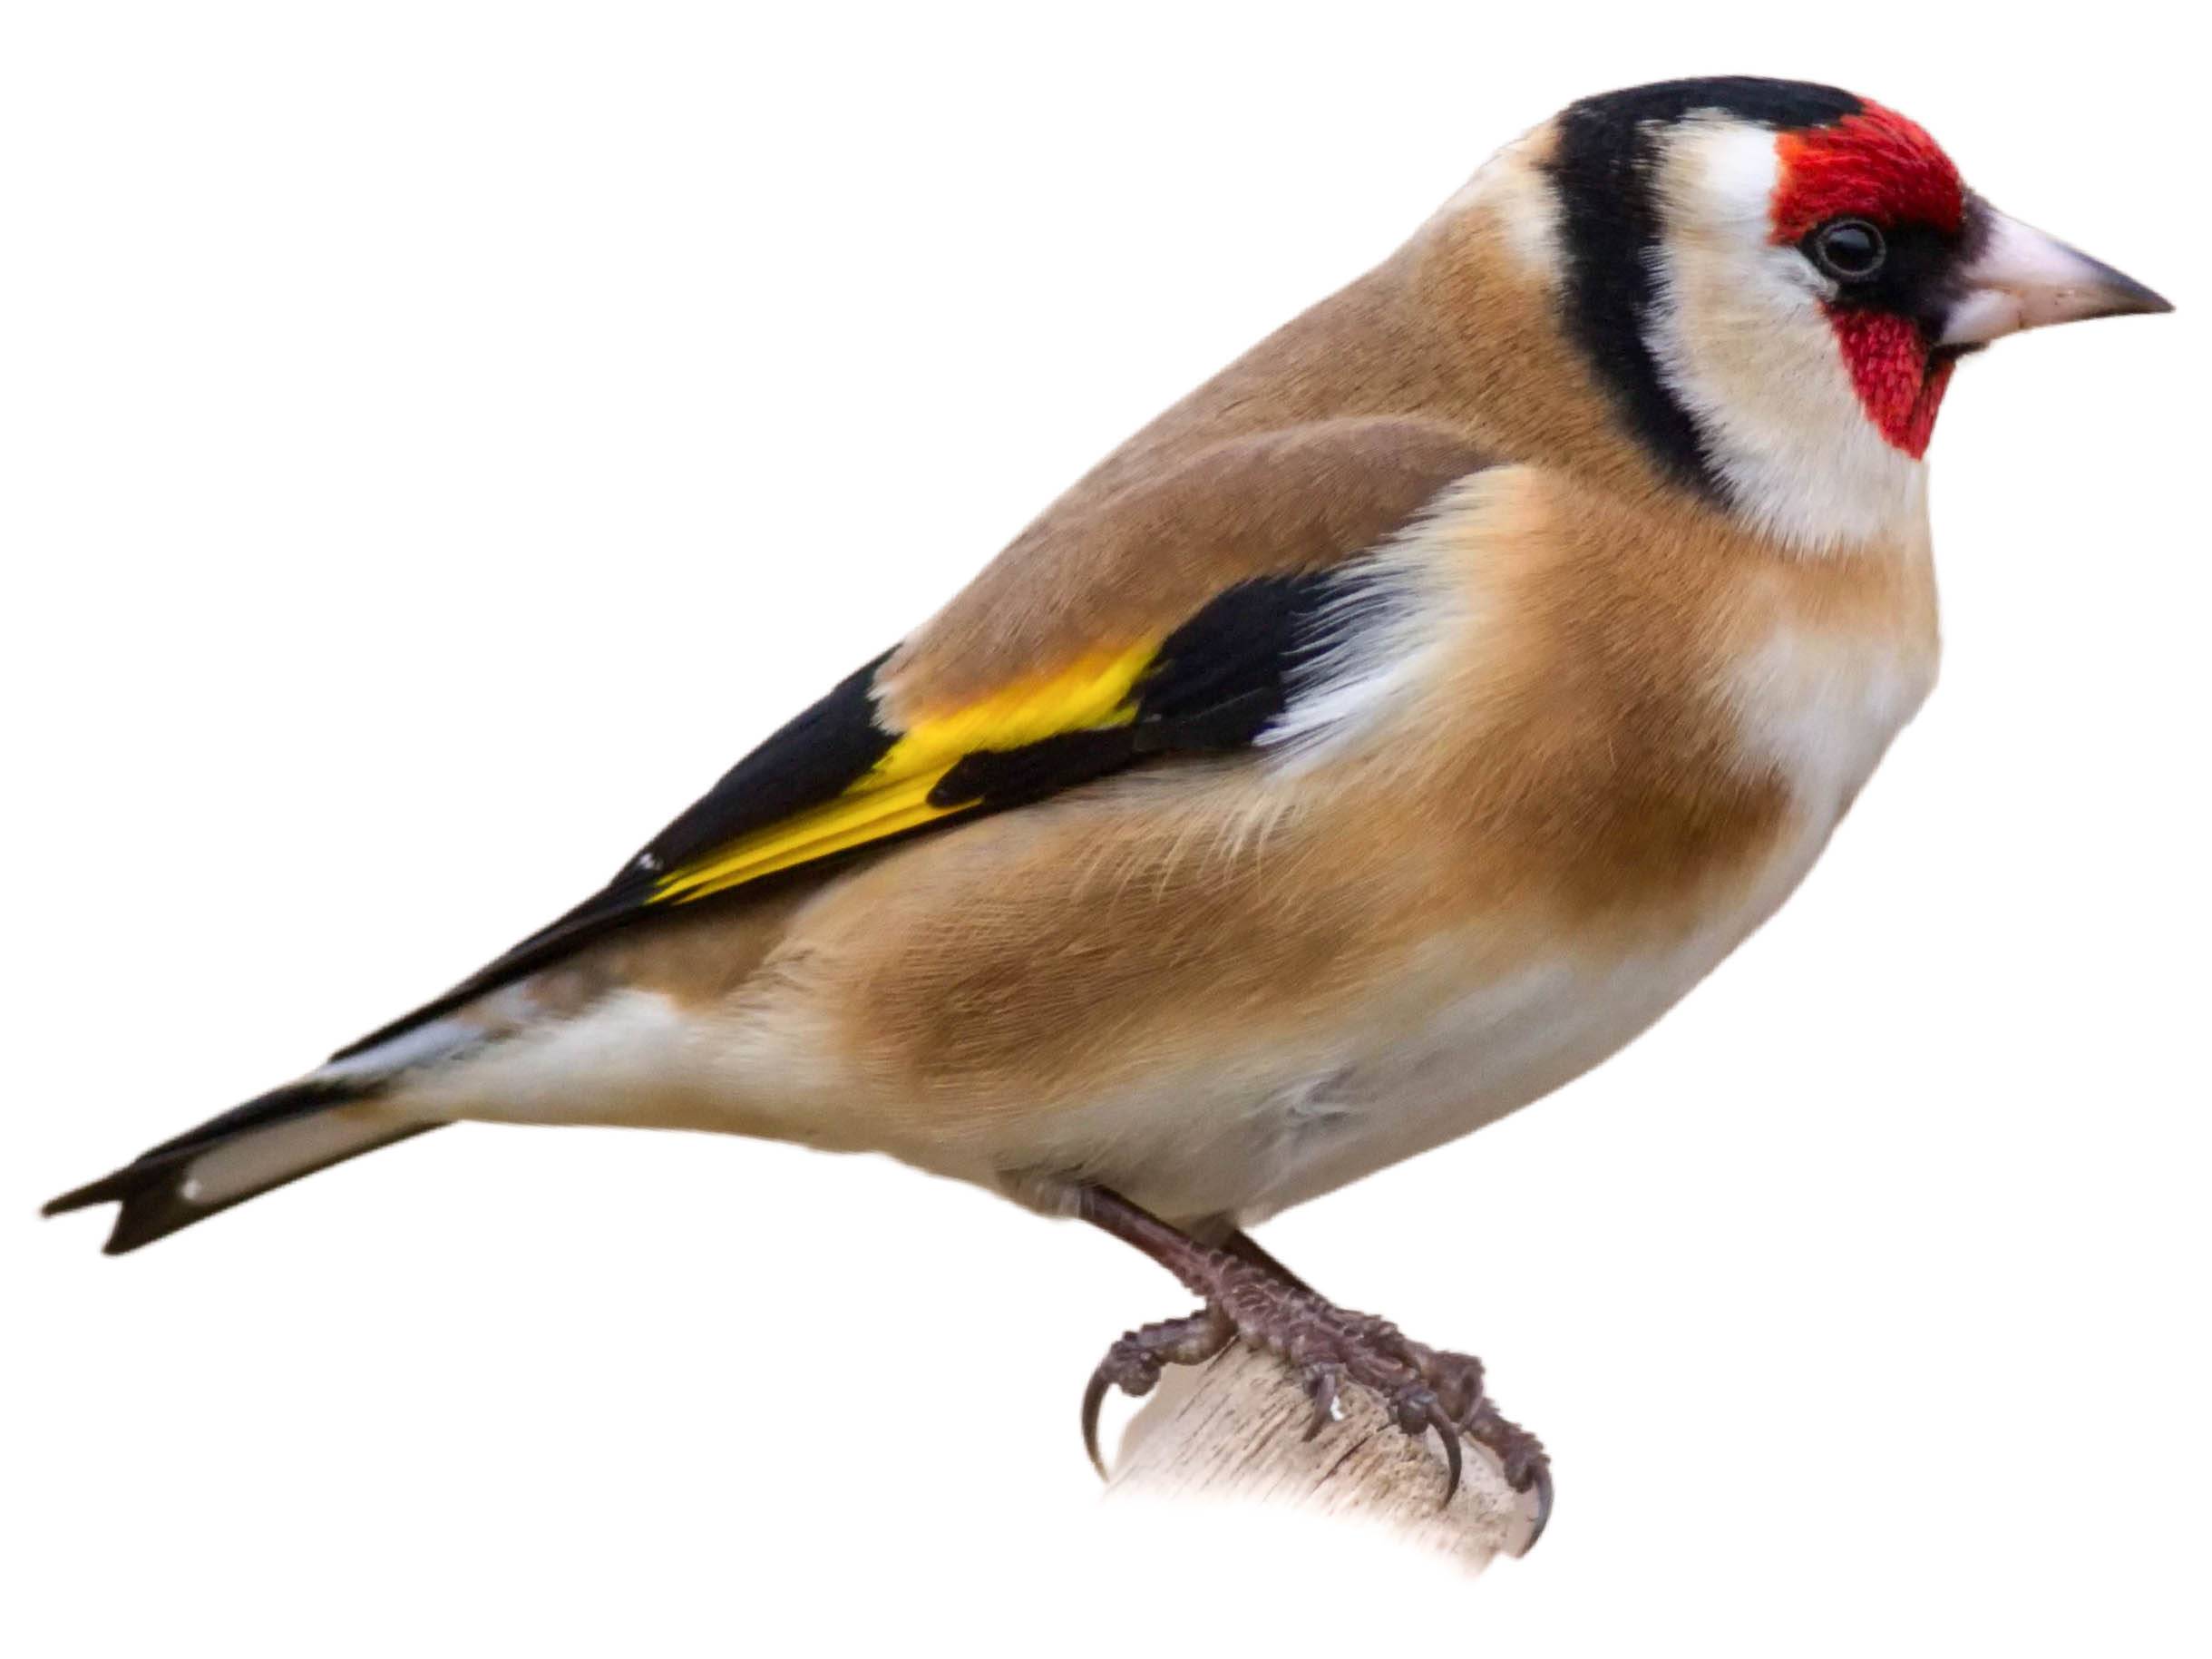 A photo of a European Goldfinch (Carduelis carduelis), male